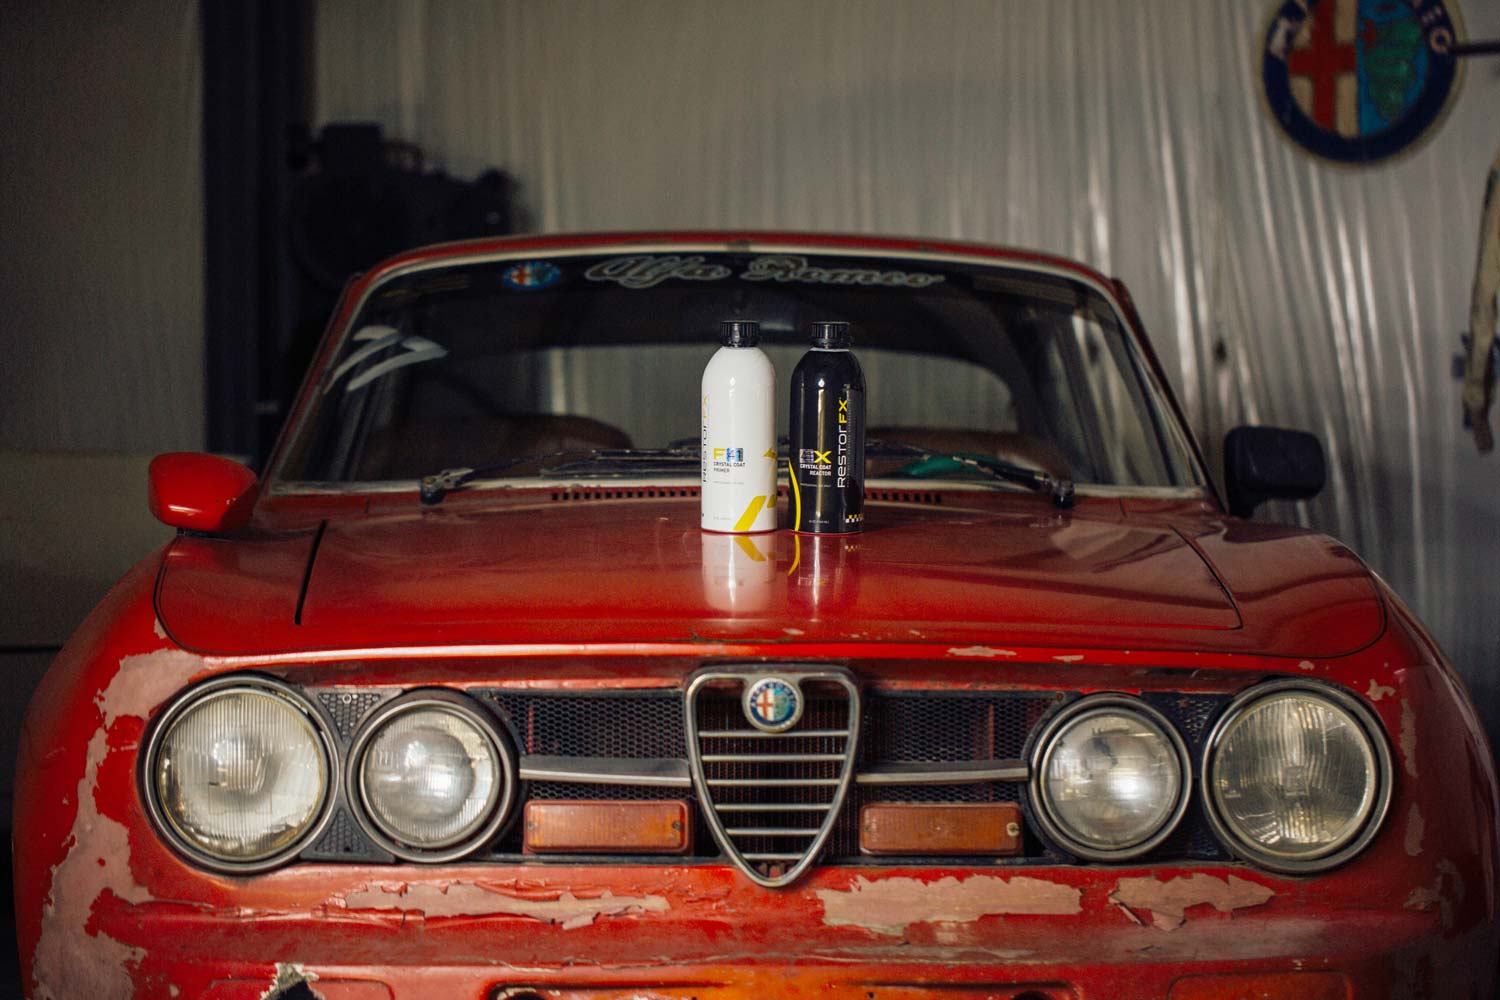 RestorFX F and X product bottles on the hood of a red vintage 1967 Alfa Romeo Giulia Coupe 1750 GTV